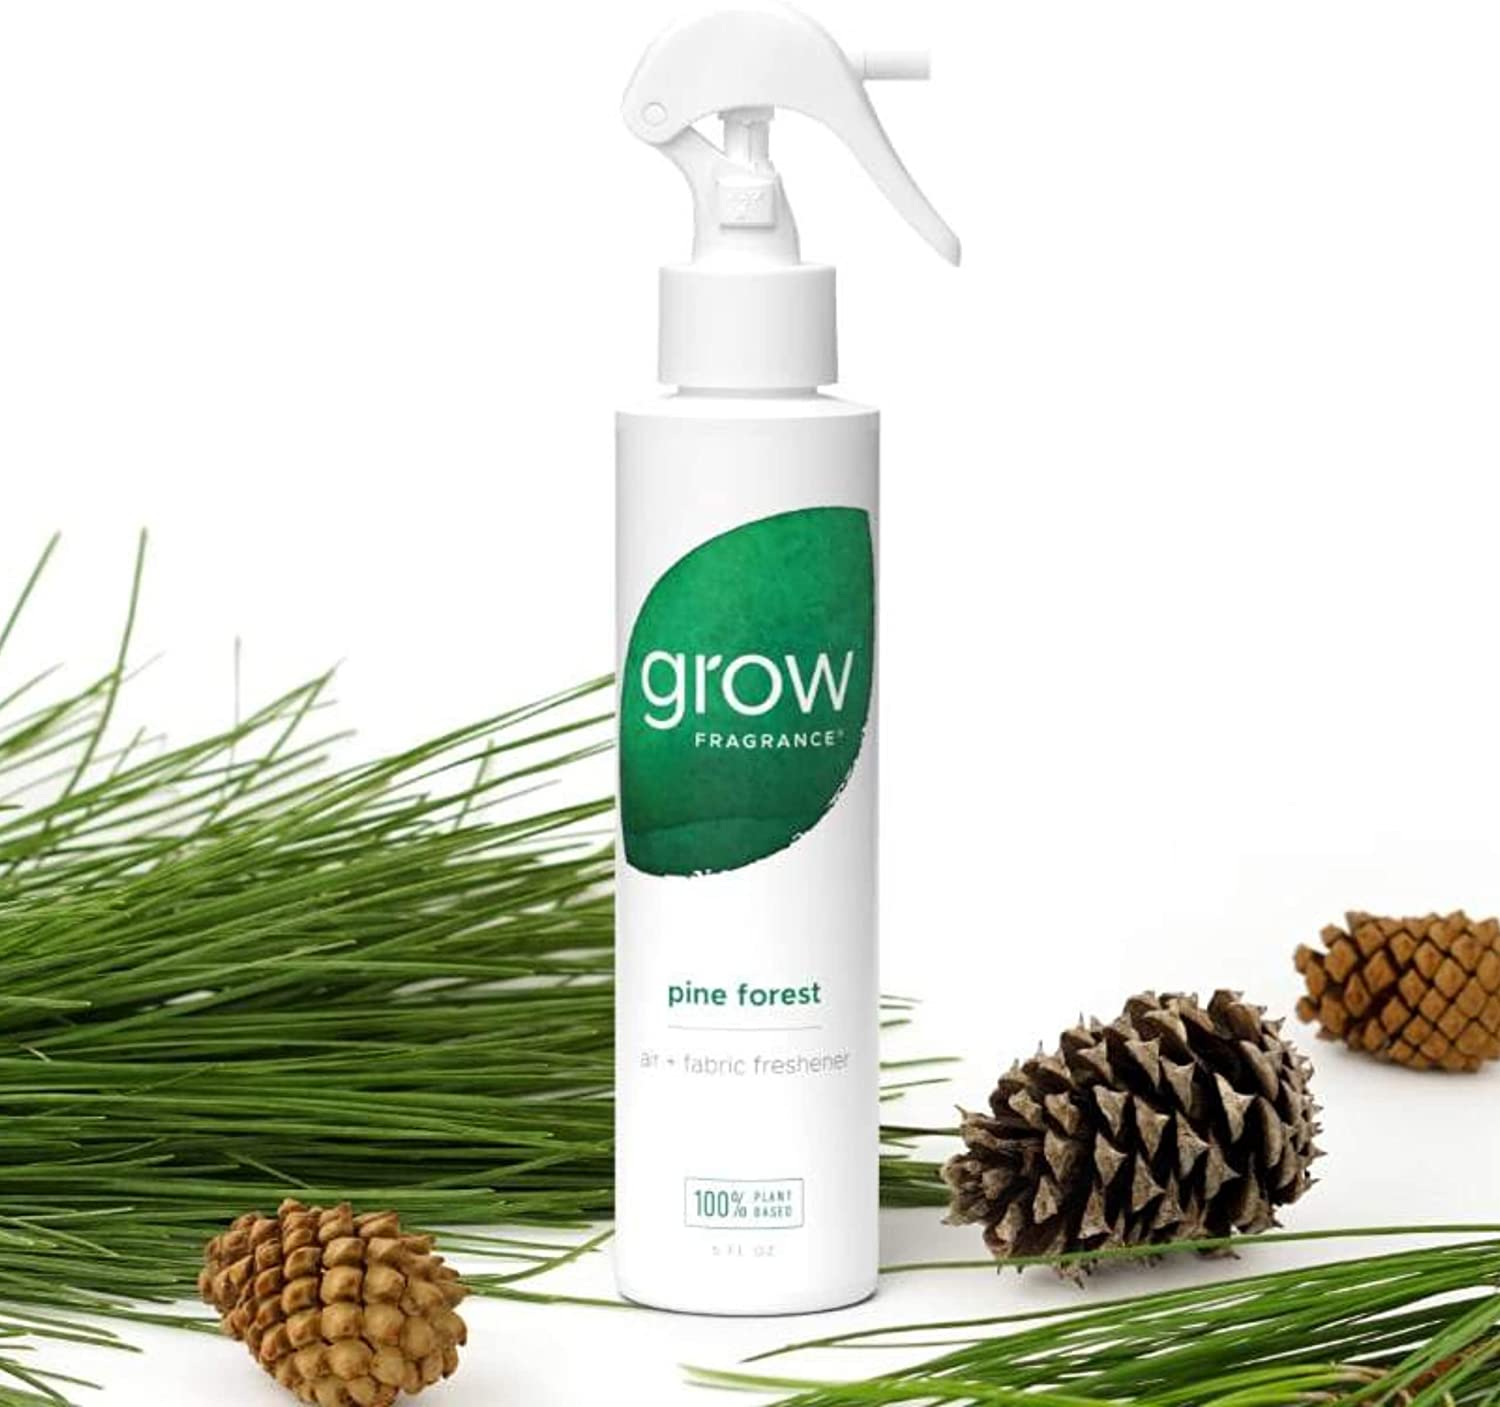 Grow Fragrance - Certified 100% Plant Based Air Freshener + Fabric Freshener Spray, Made with All Natural Essential Oils, 5oz (Pine Forest) | Amazon Stocking Stuffers | Stocking stuffers For Adults | stocking stuffers for men | mens stocking stuffers | Stocking stuffers for her | Stocking stuffers for guys | Cheap stocking stuffers | Best stocking stuffers | Stocking stuffers for wife | stocking stuffer gifts | Best stocking stuffers